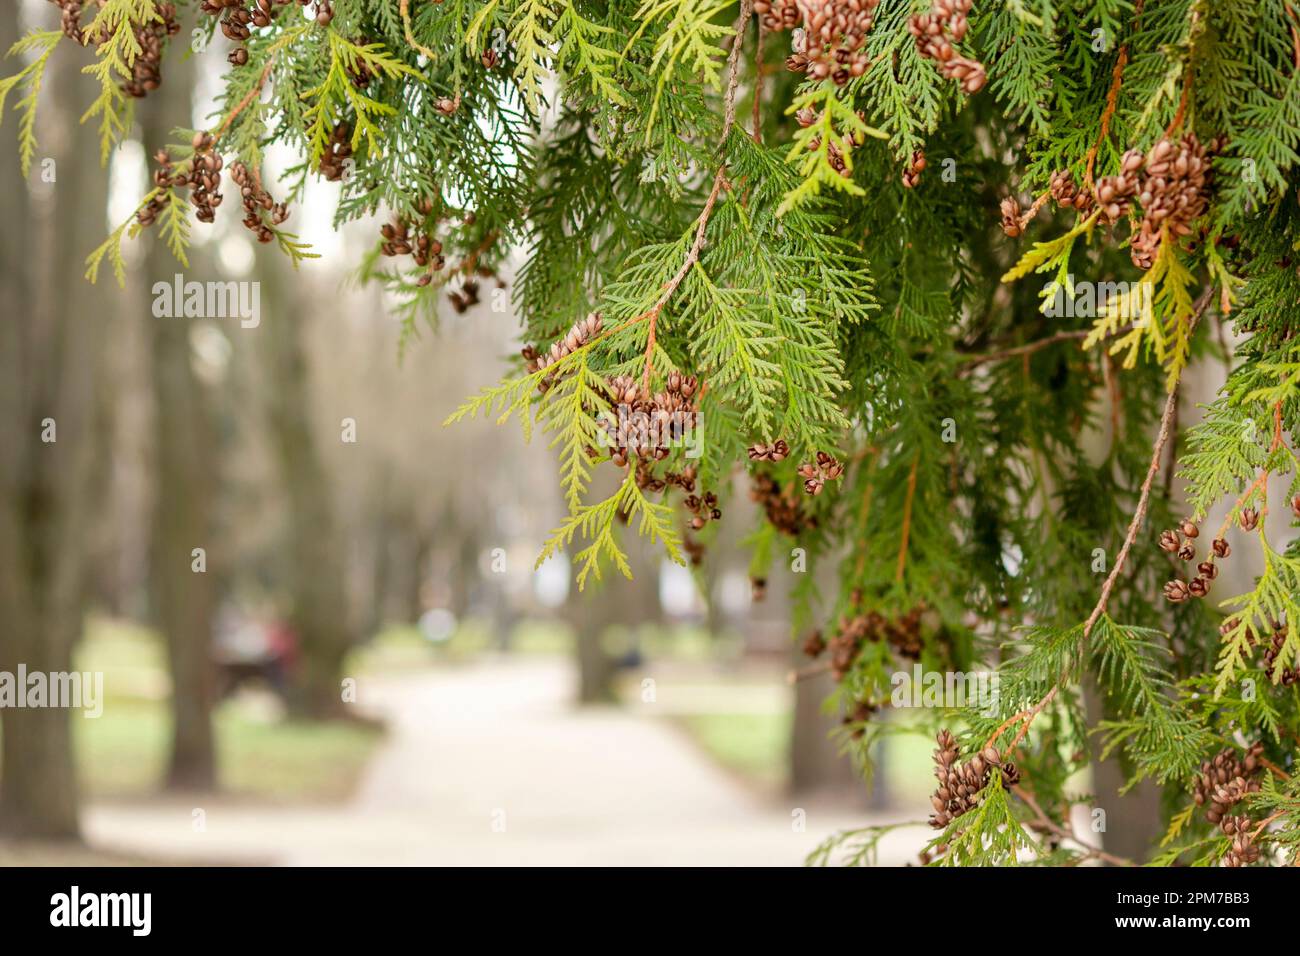 Detail of a branch of Calocedrus decurrens, an ornamental tree used in horticulture. Blurred alley background Stock Photo